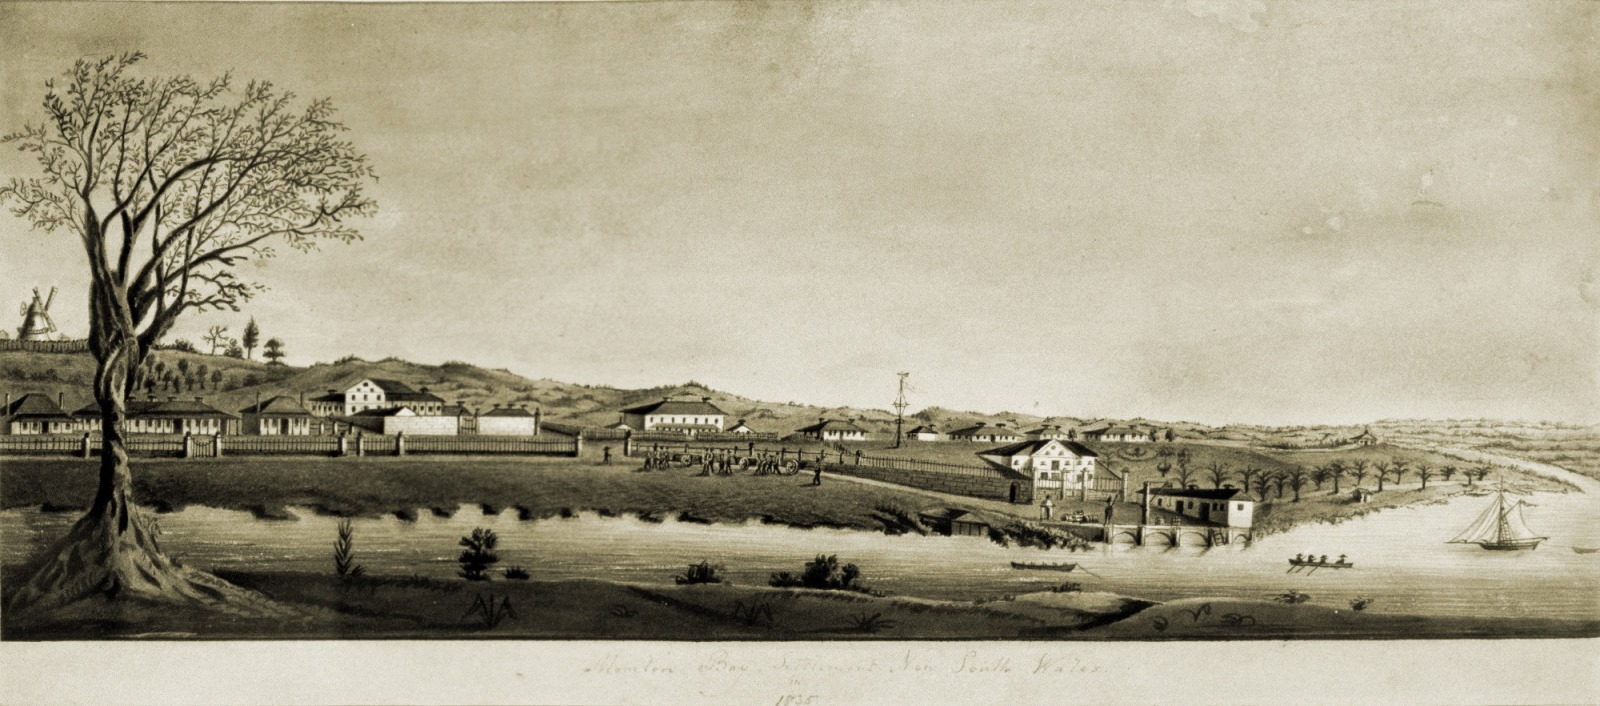 Image of Moreton Bay Settlement New South Wales in 1835